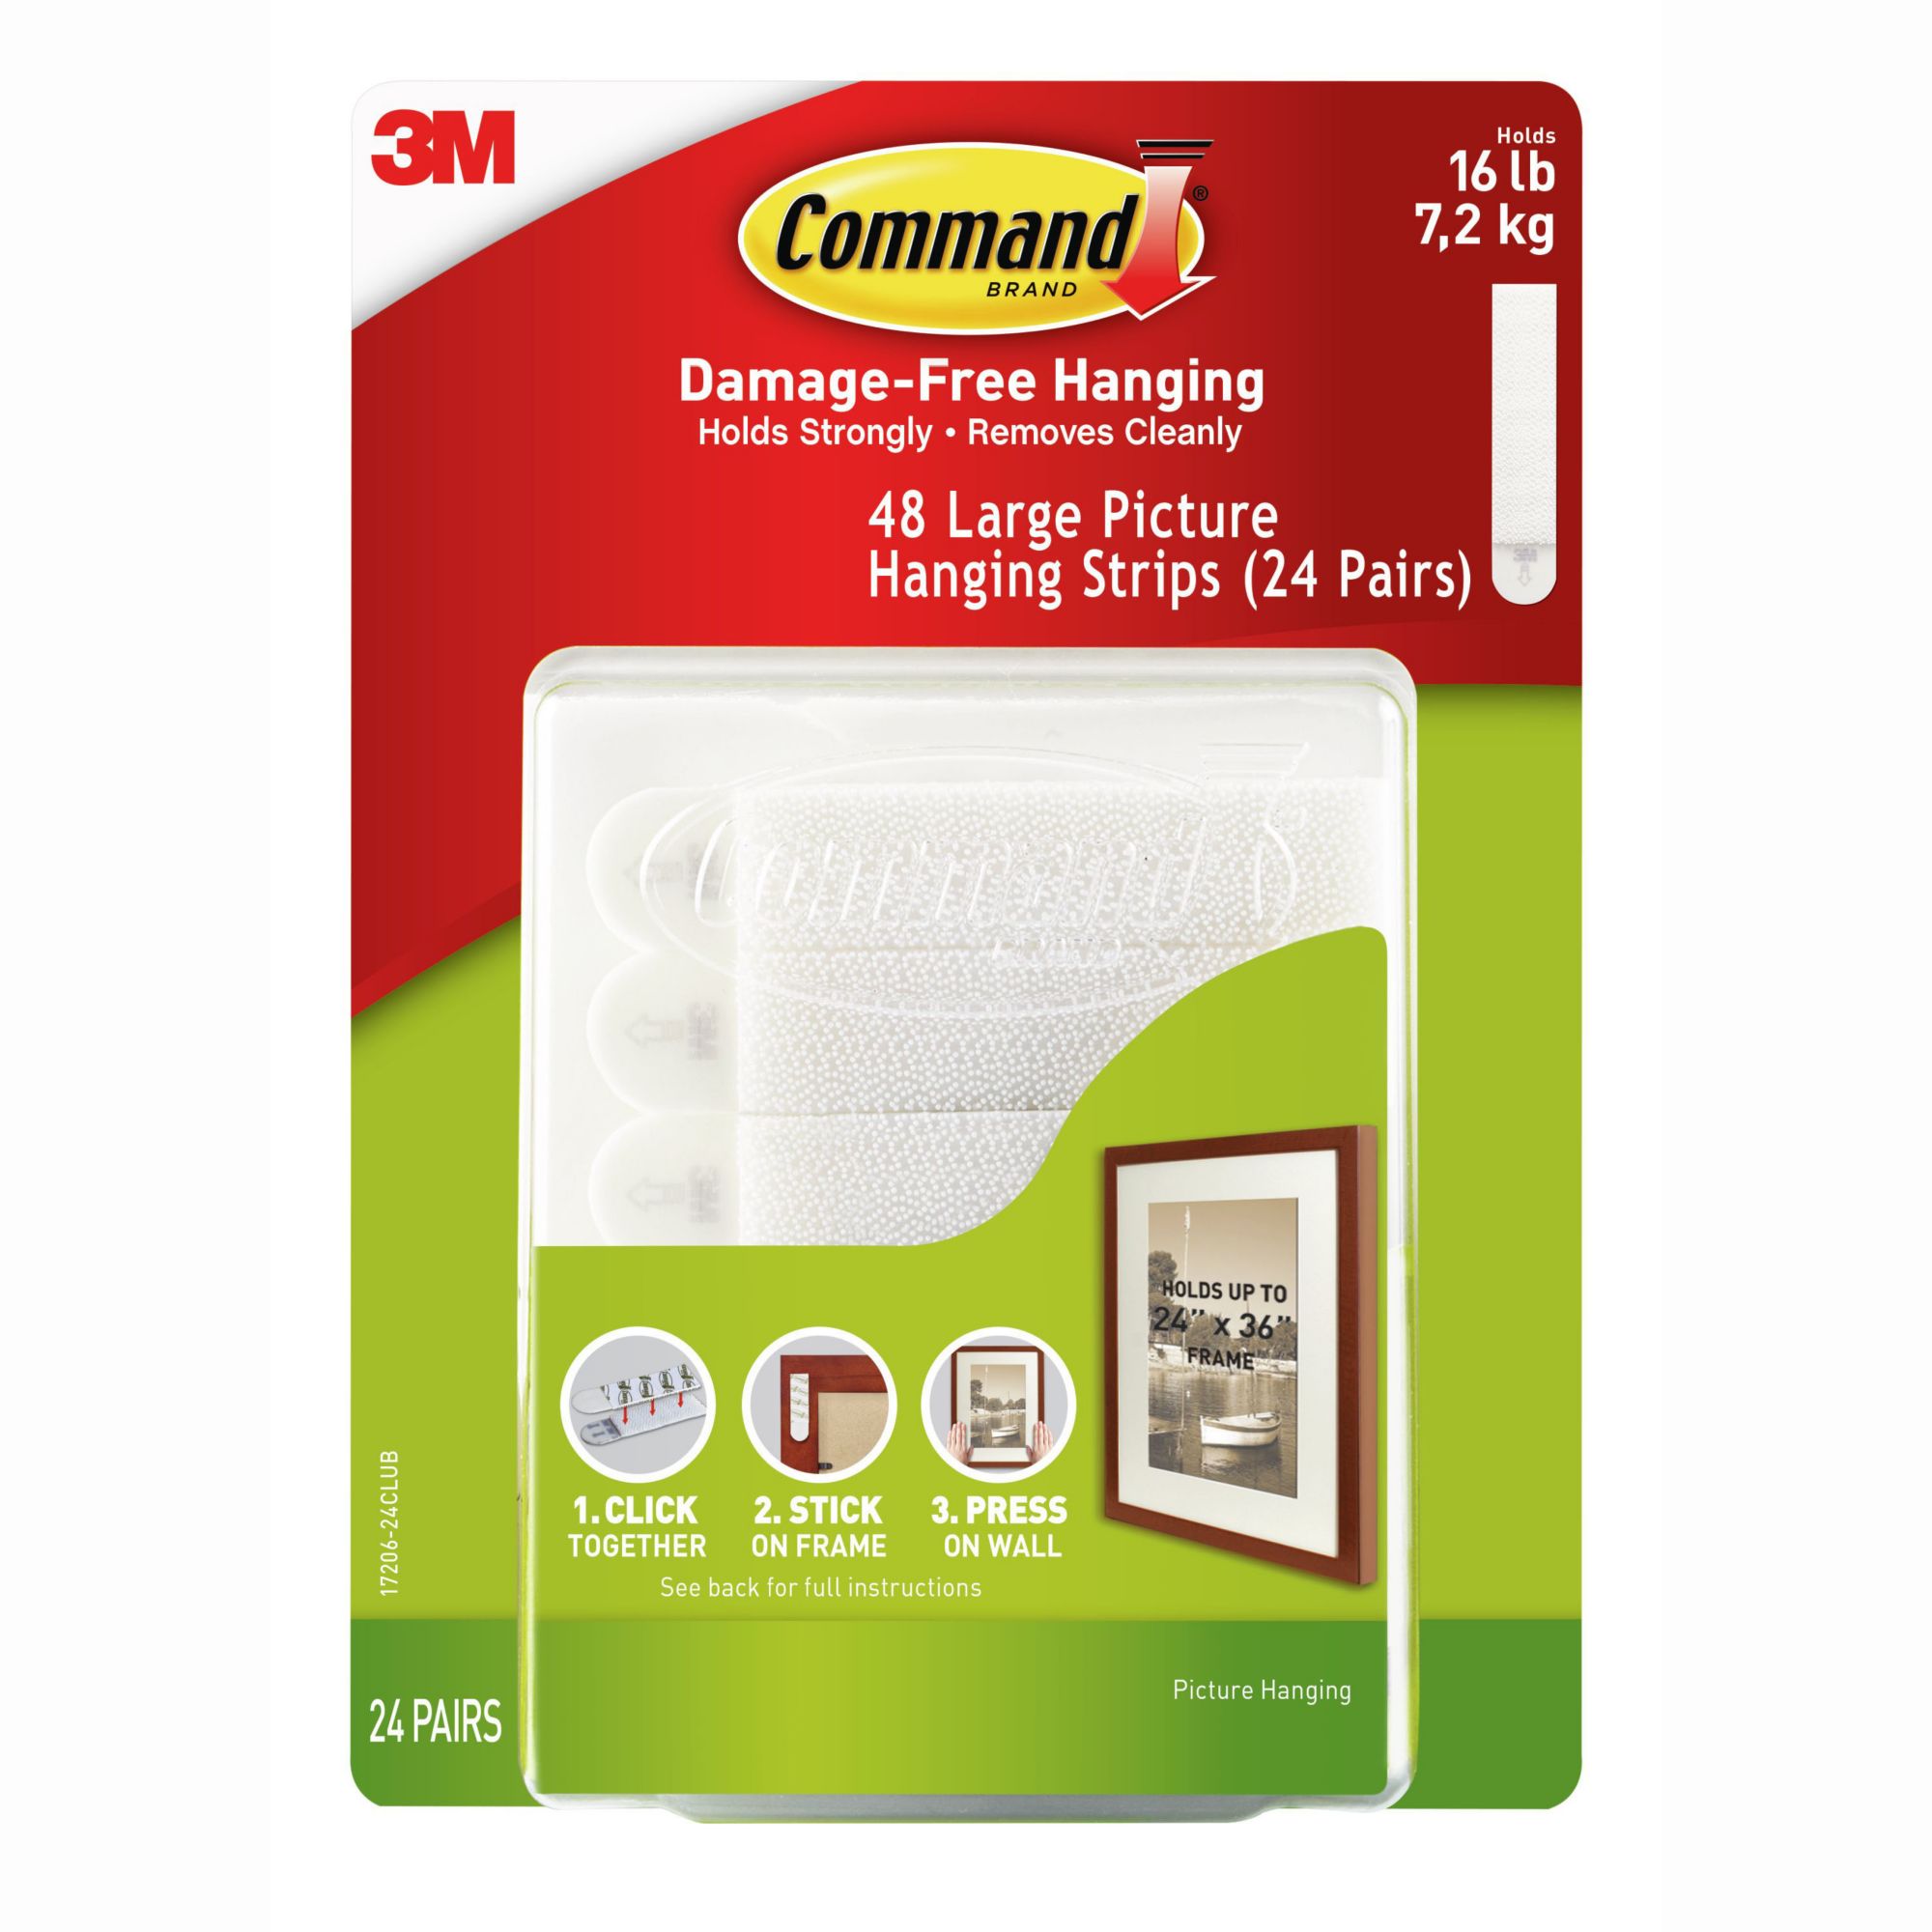 3M Command 48 Large White Picture Hanging Strips 24 Pairs Damage-Free